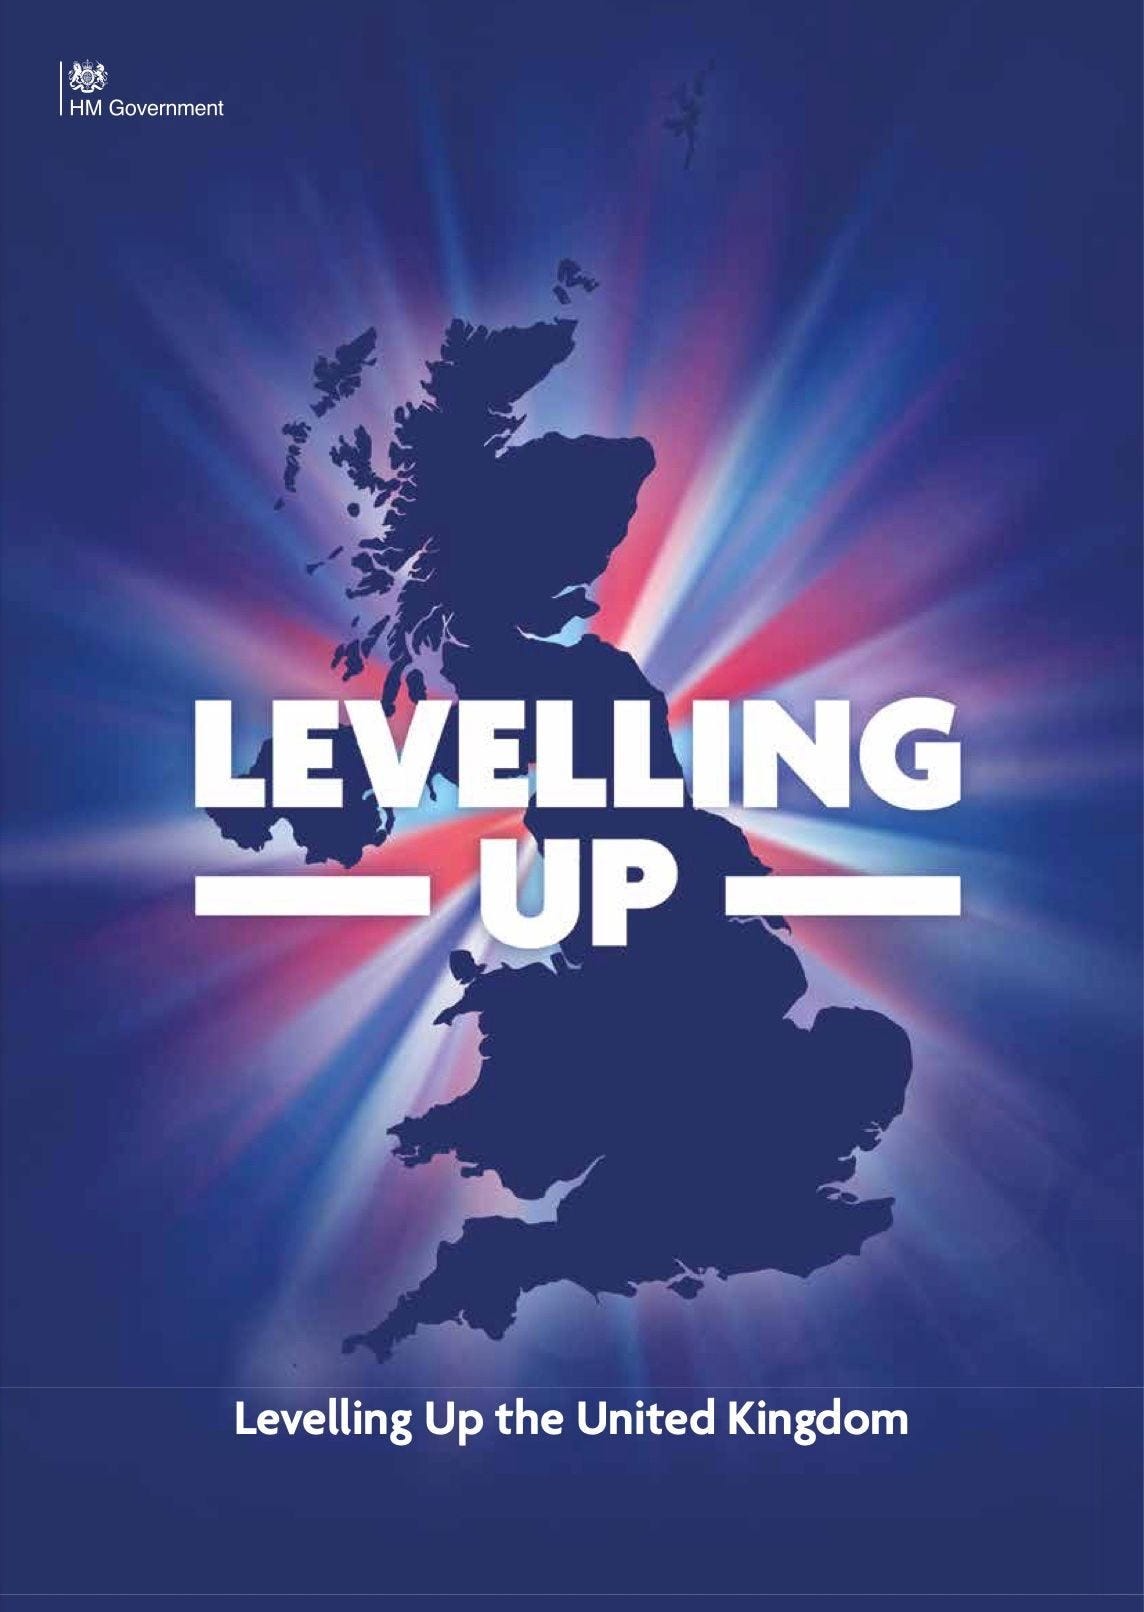 https://www.gov.uk/government/publications/levelling-up-the-united-kingdom